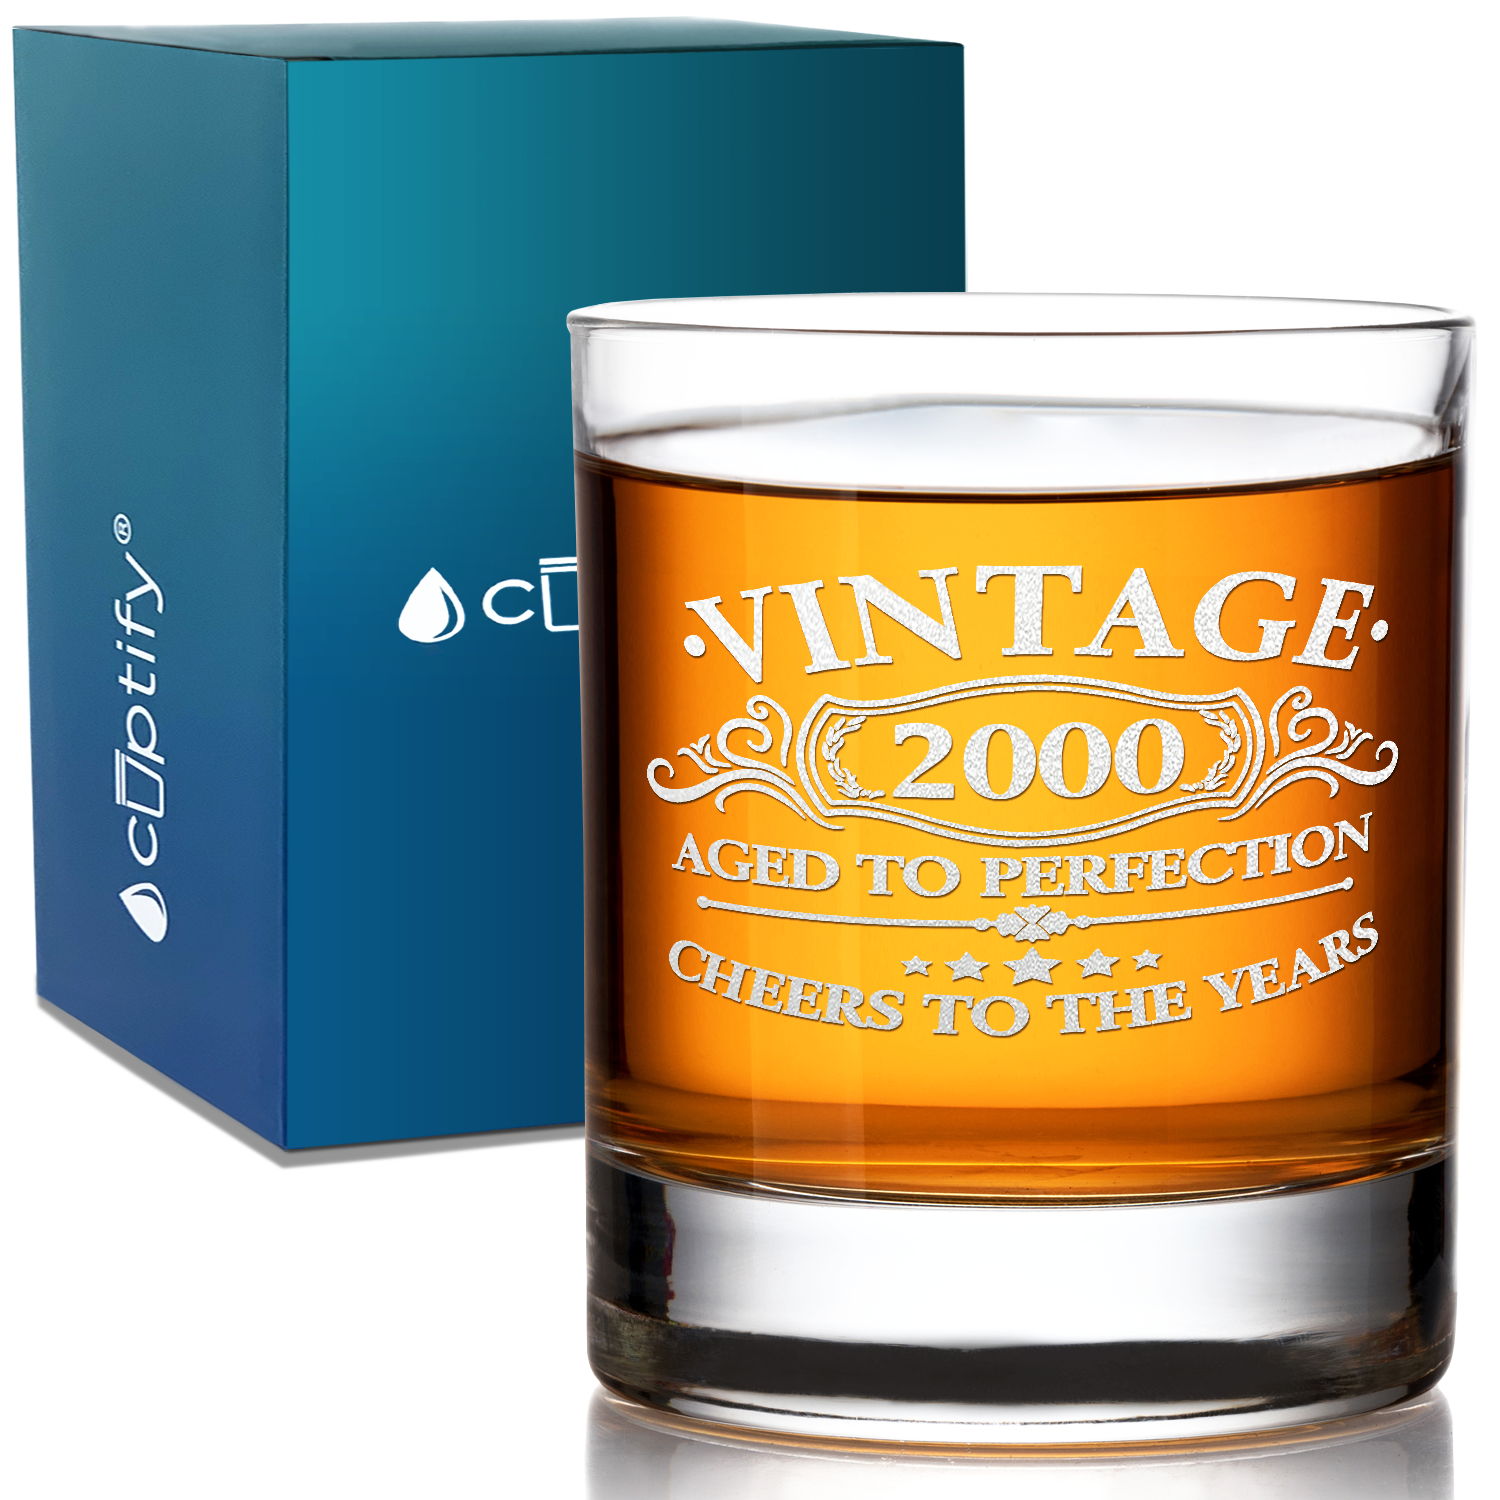 Vintage Aged To Perfection Cheers To 21 Years 2000 Laser Engraved on 10.25oz Old Fashion Glass